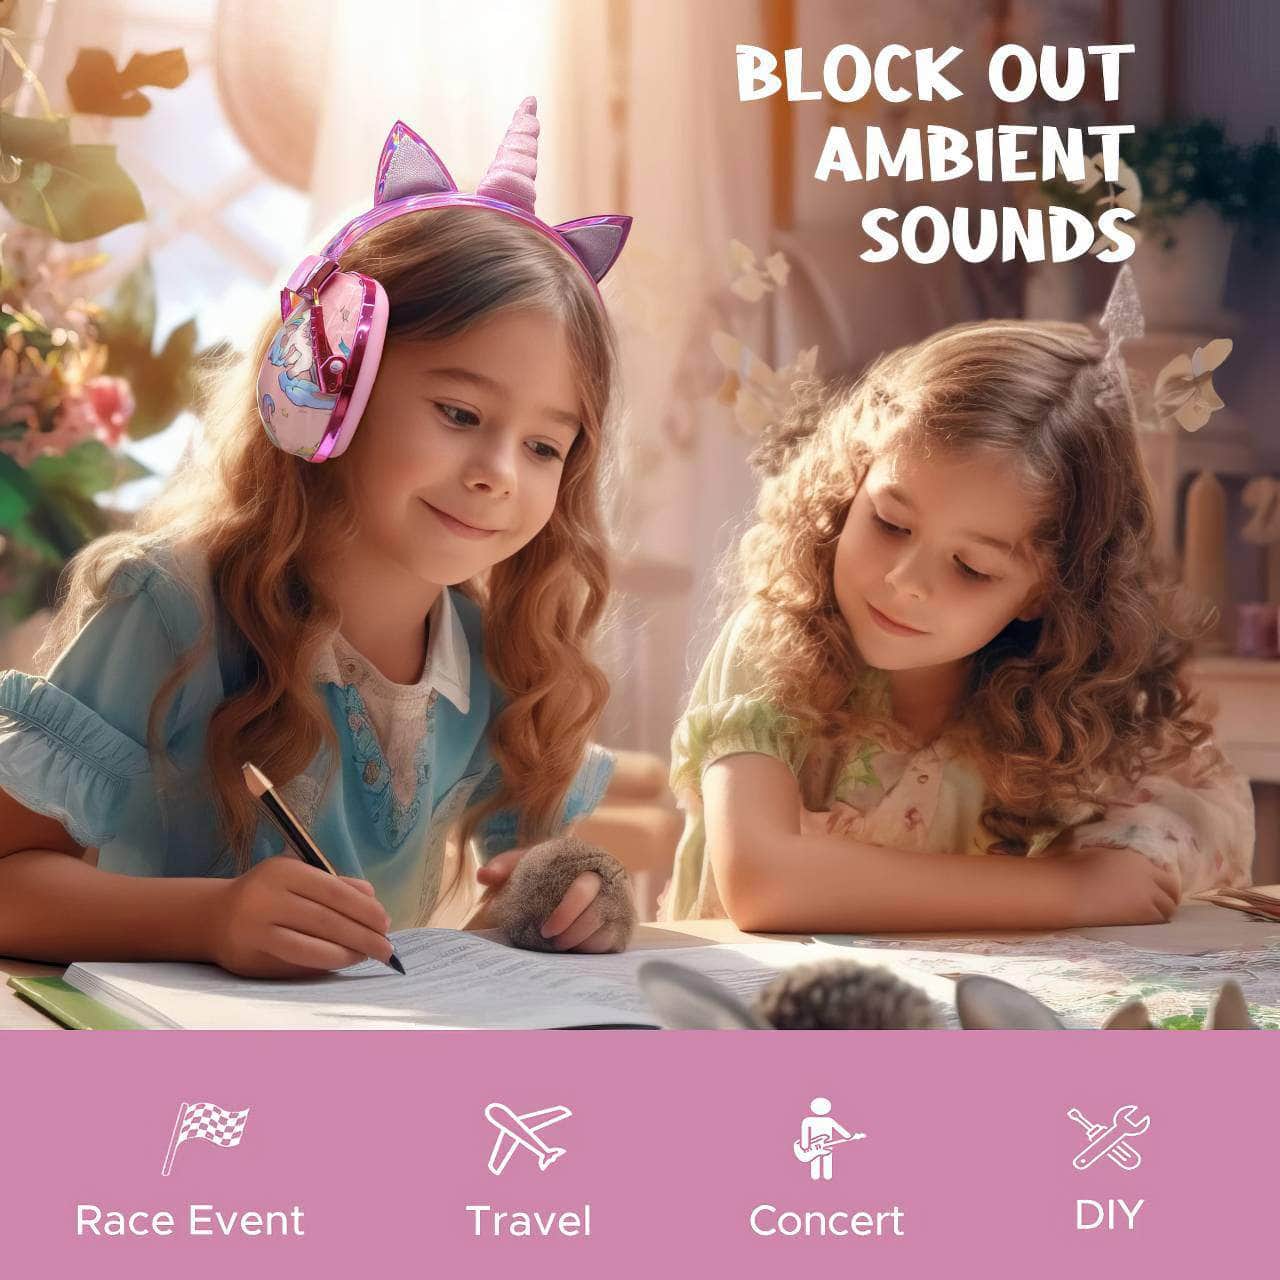 New Kid Earmuffs - Safety Ear Protectors for Children, 22dB Noise Protection, Noise Cancelling Headphones, Kids Gifts